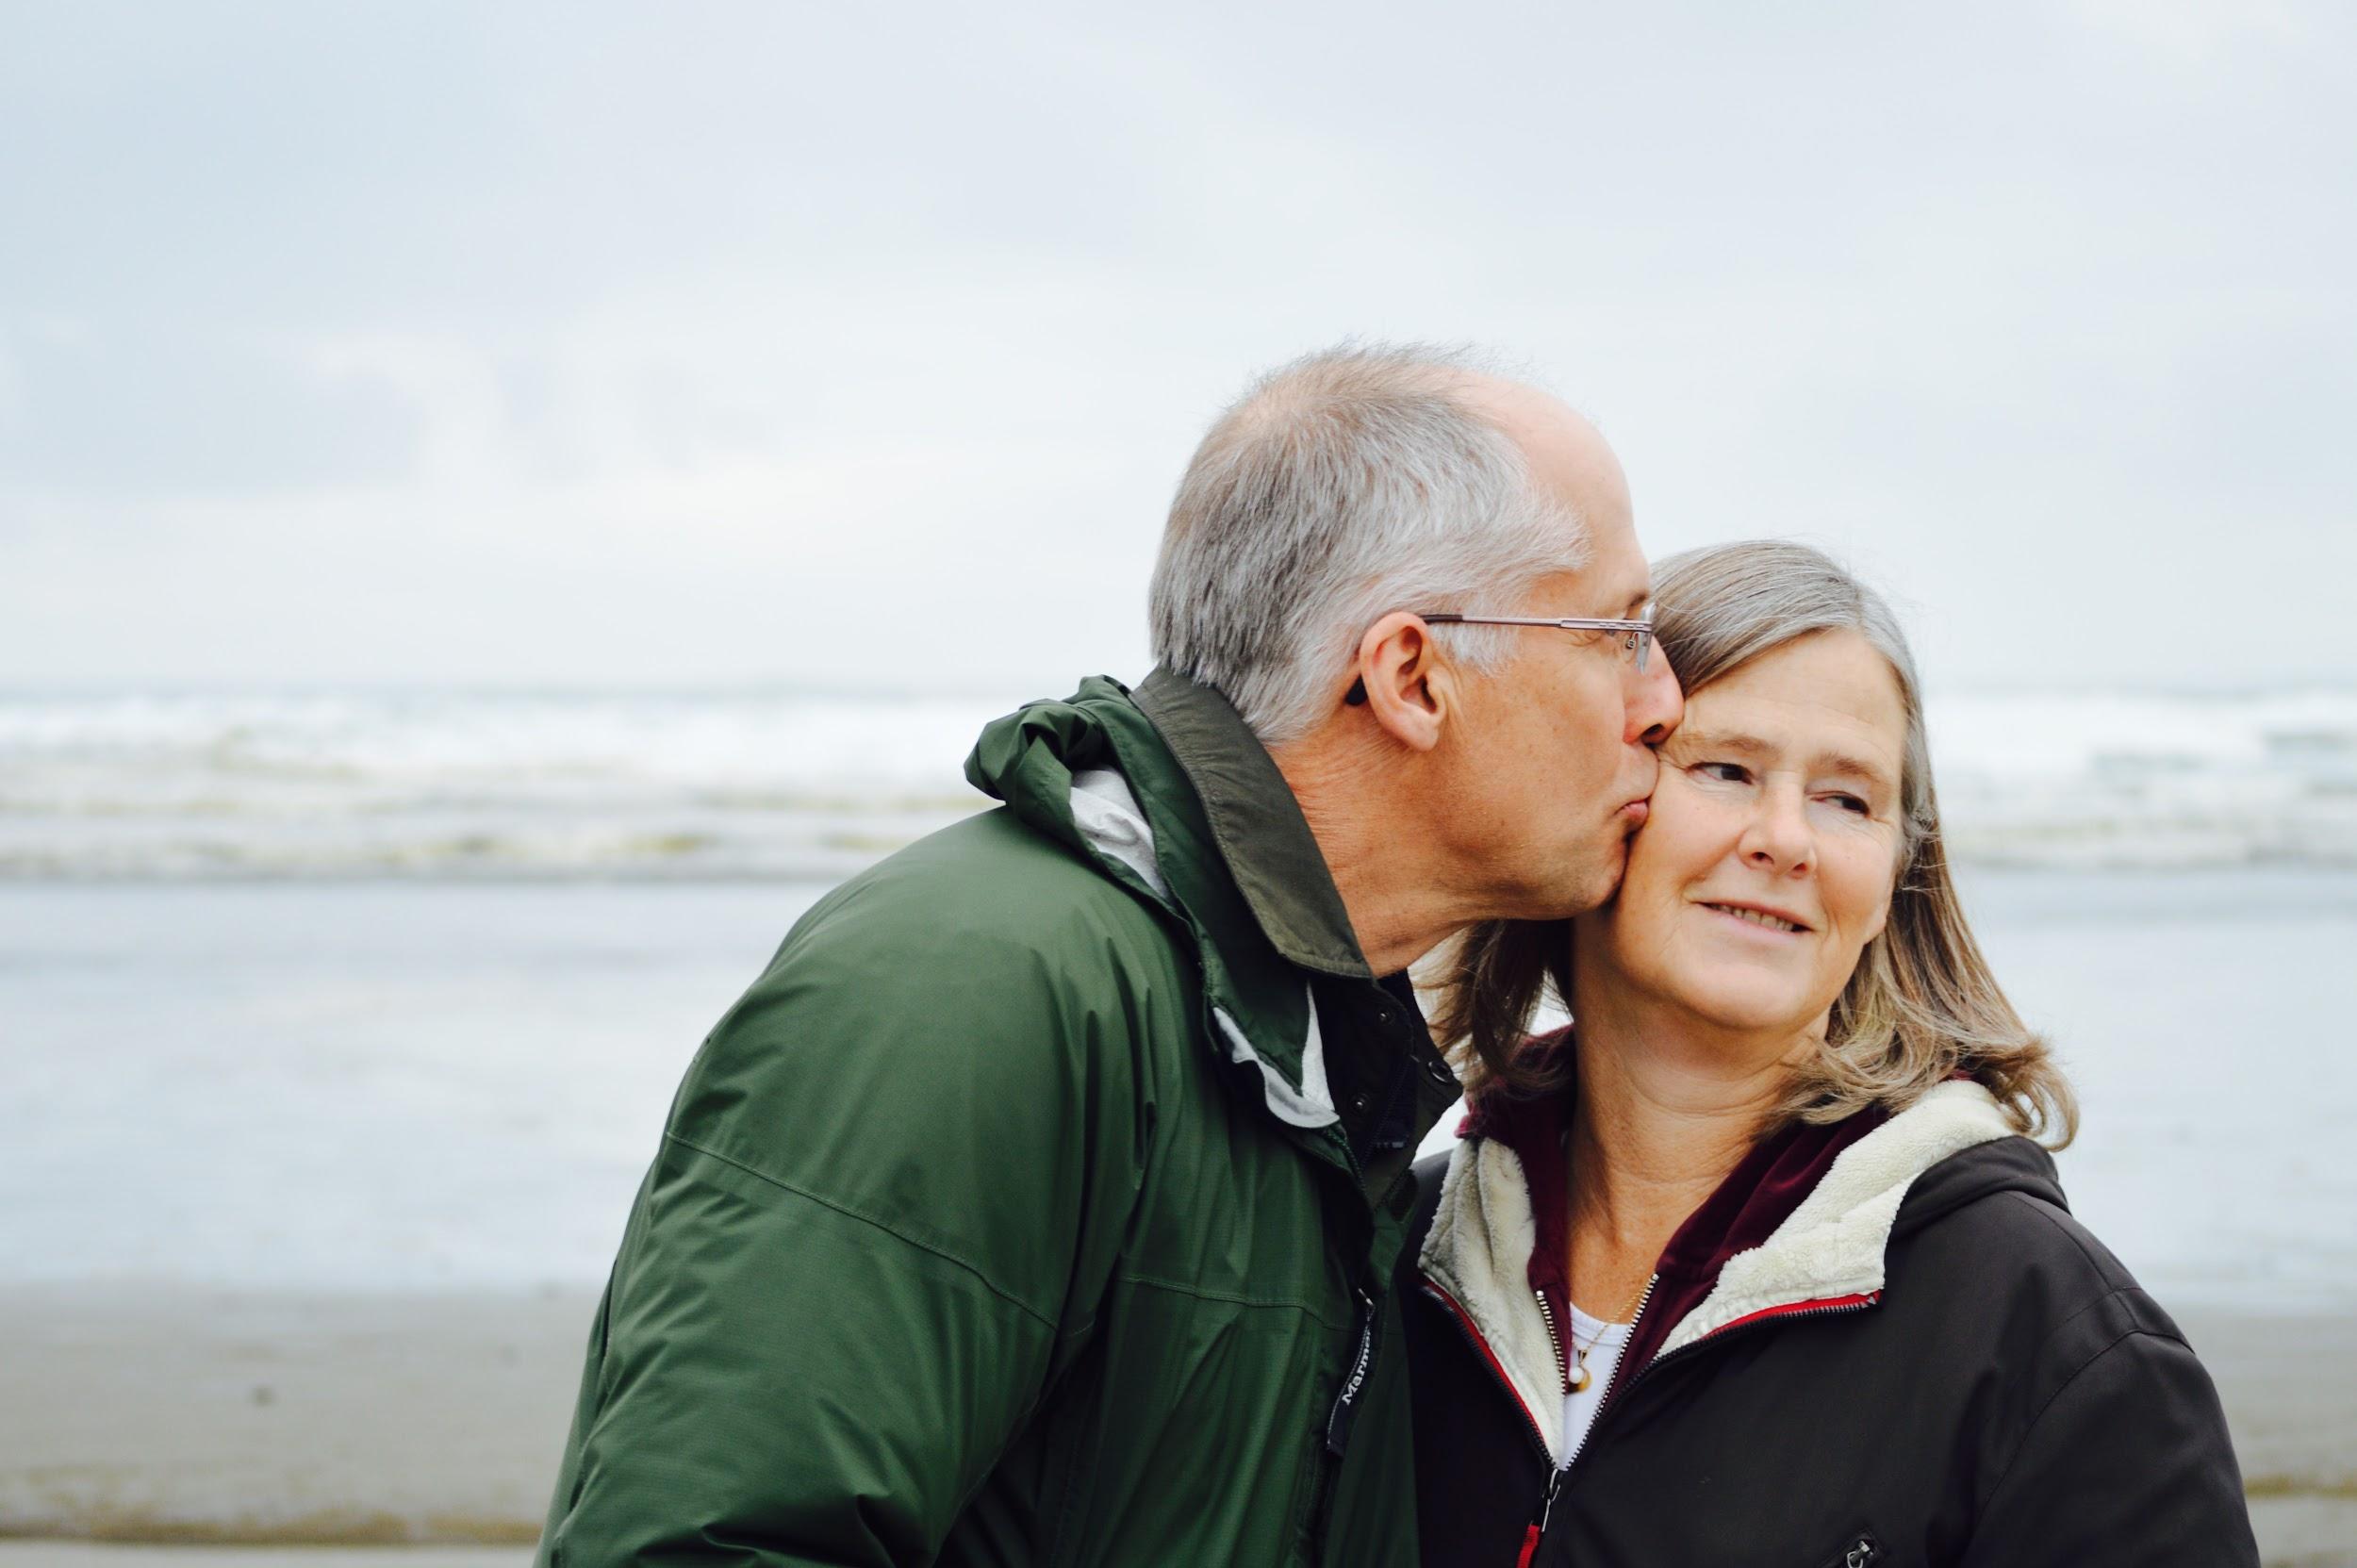 An older male and older female stand on the beach with the ocean behind them. The man is kissing the woman on the cheek.